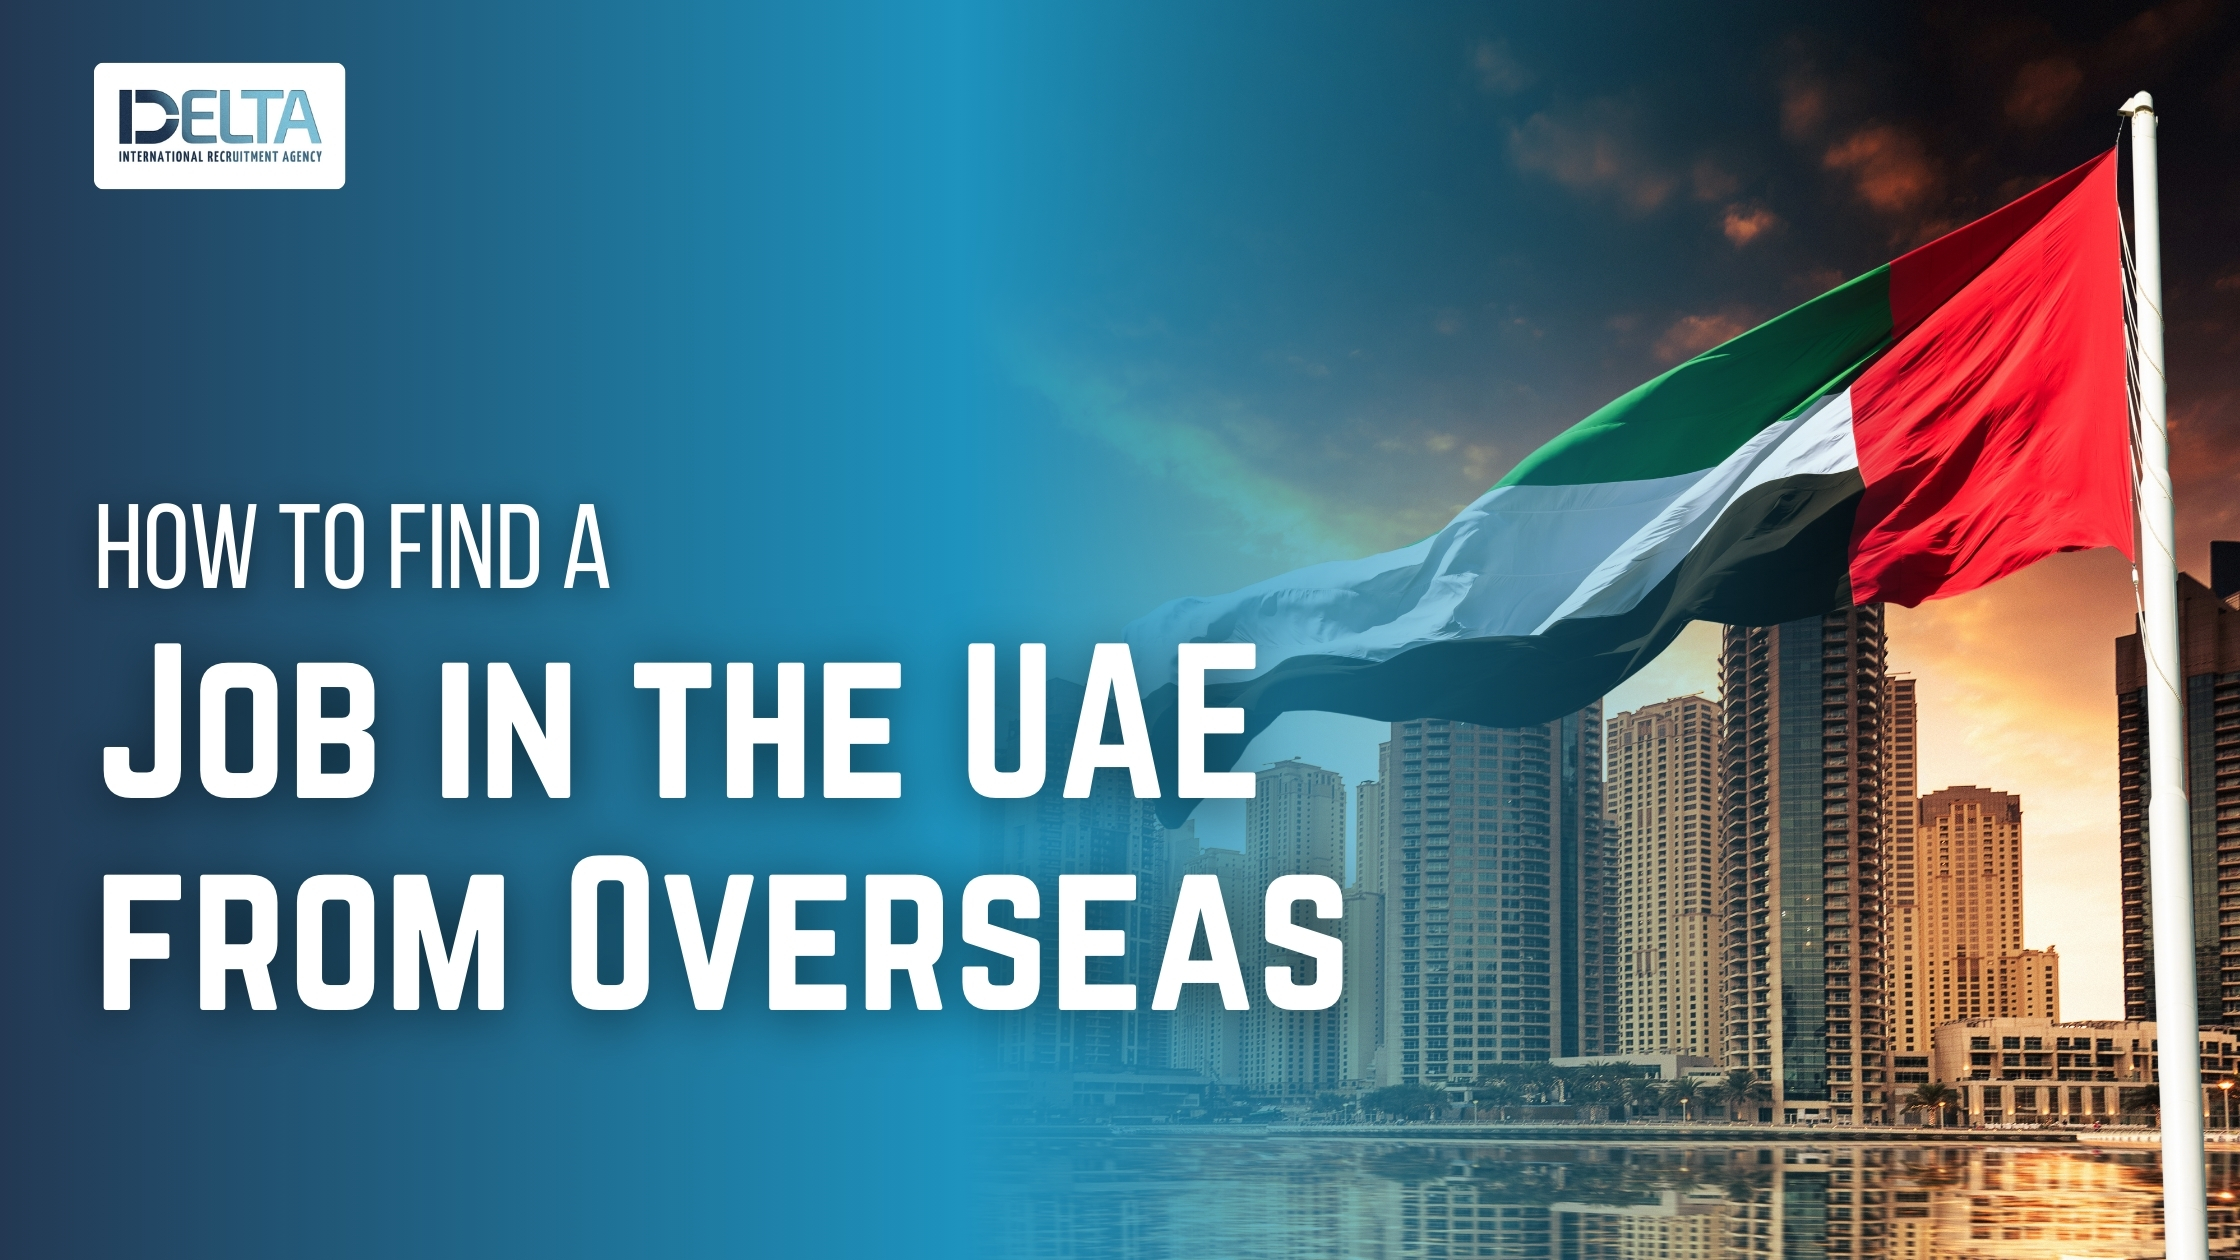 How to Find a Job in the UAE from Overseas?